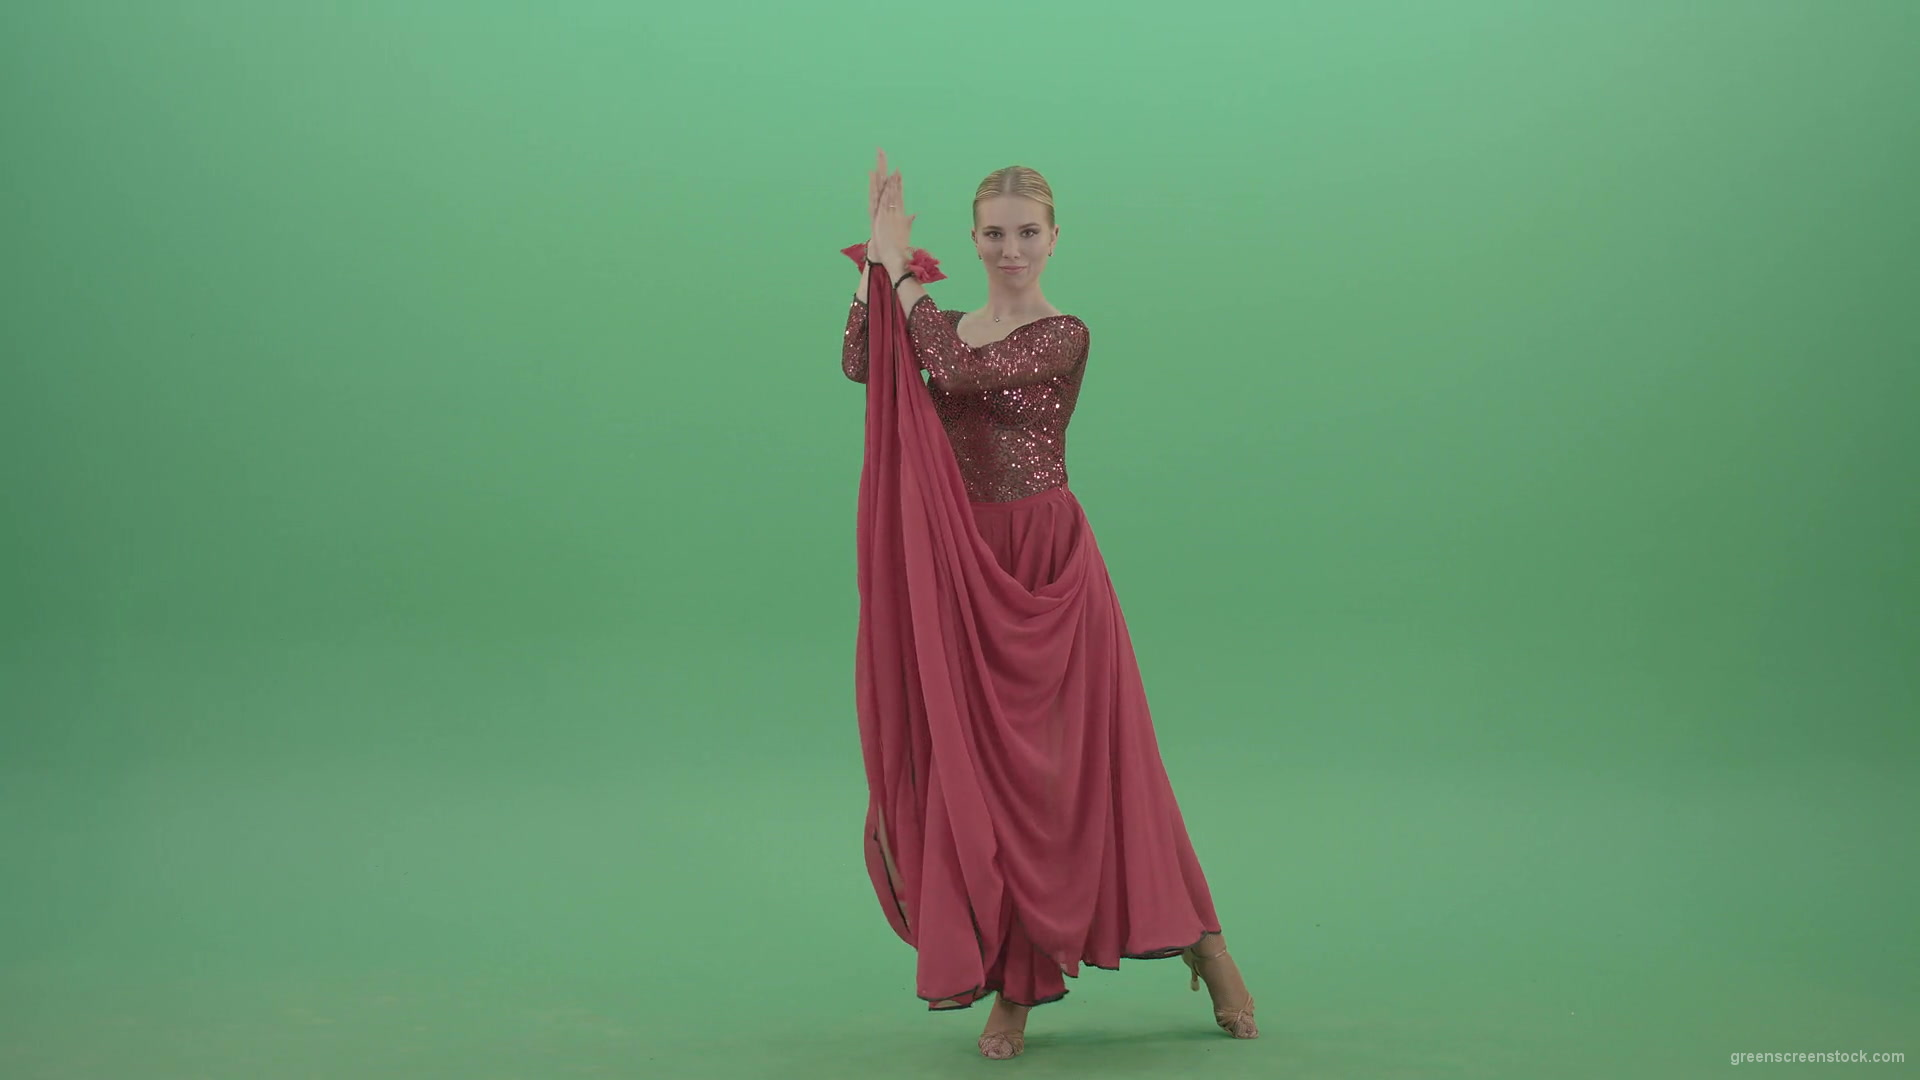 Elegant-woman-in-red-ballroom-dress-spinning-and-clapping-in-hands-isolated-on-green-screen-4K-Video-Footage-1920_006 Green Screen Stock